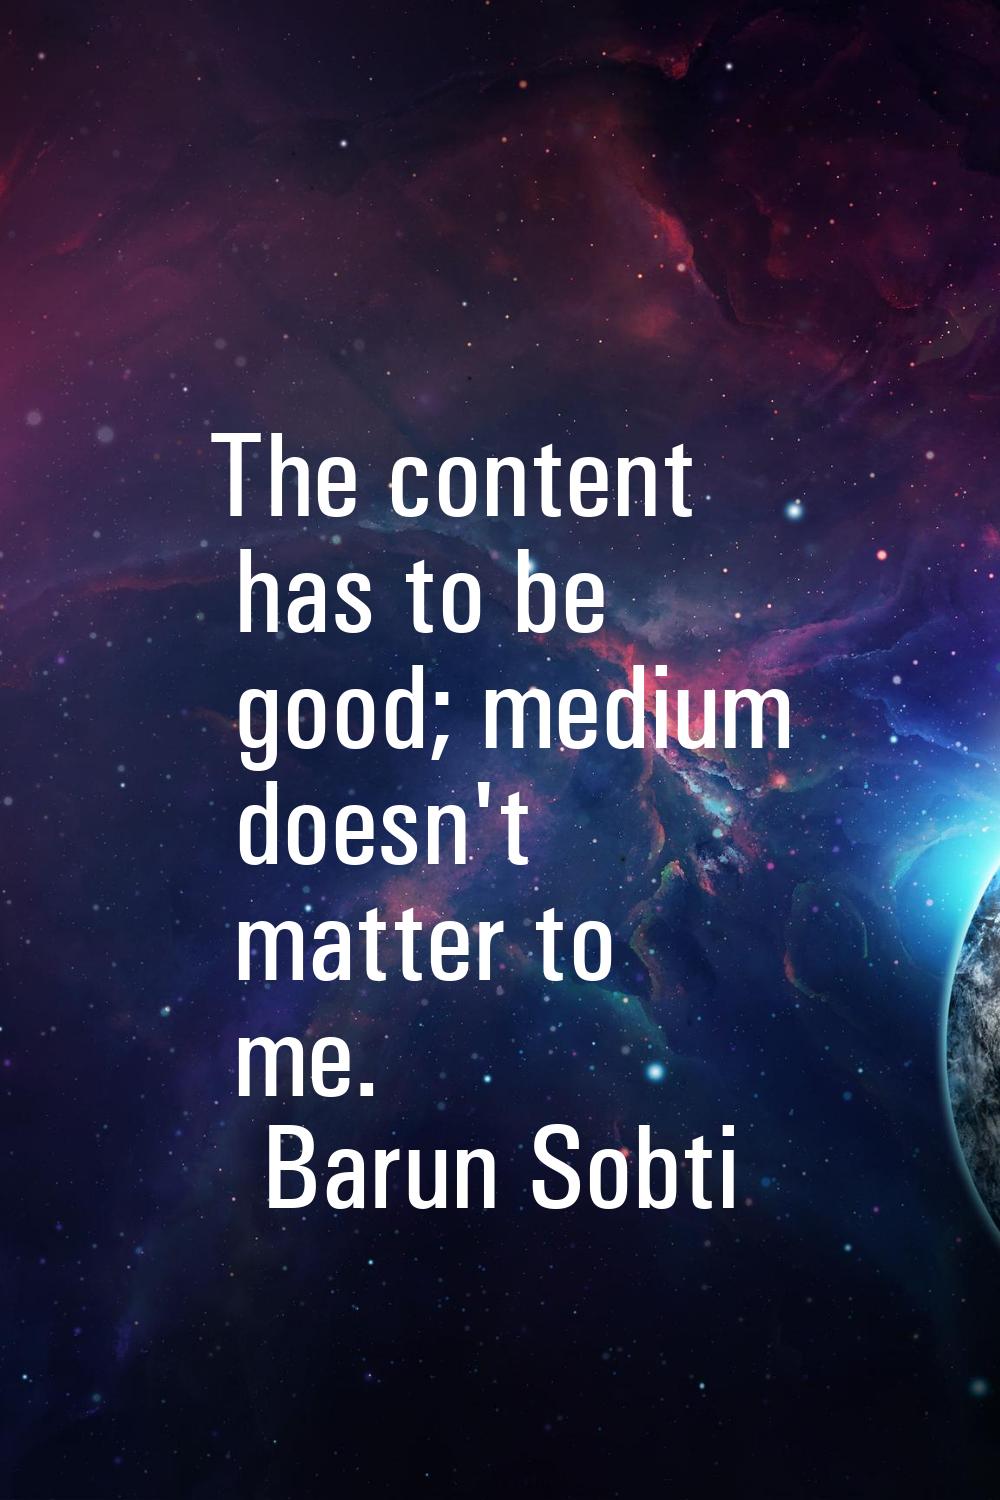 The content has to be good; medium doesn't matter to me.